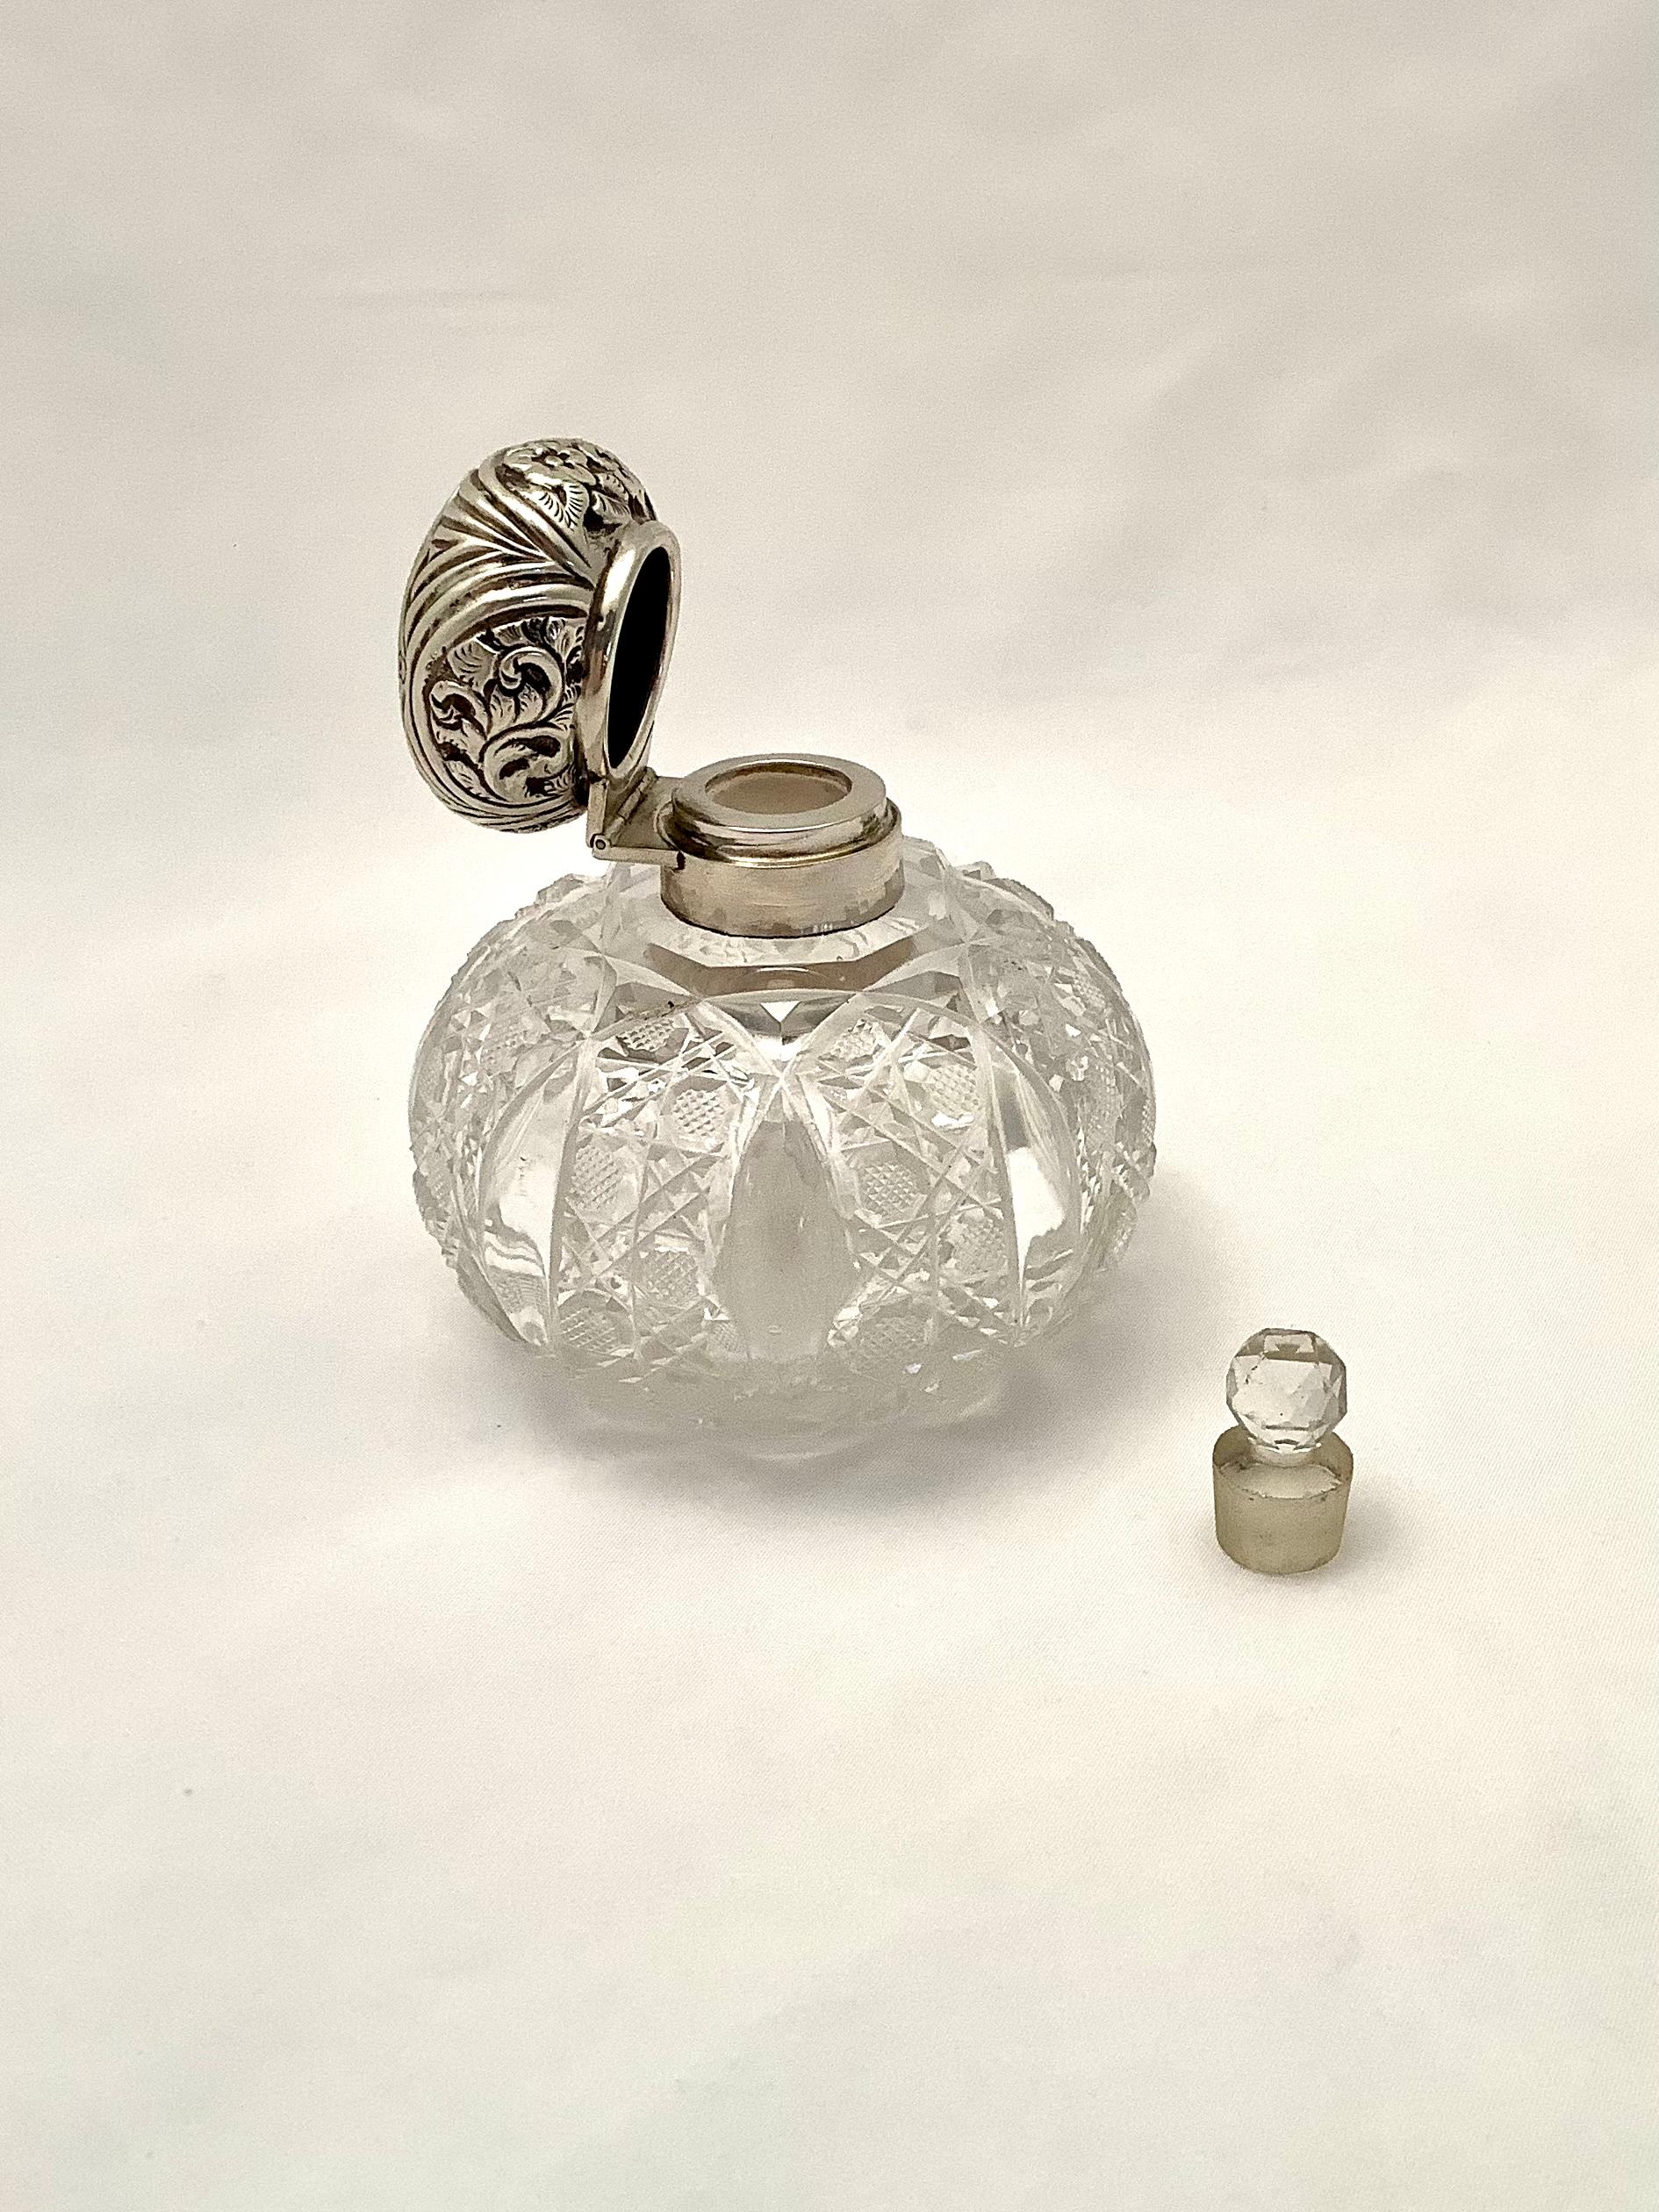 Early 20th century Victorian style cut crystal perfume bottle with sterling silver lid.  Original stopper enclosed.  Great condition. Stamped hallmark on silver lid.